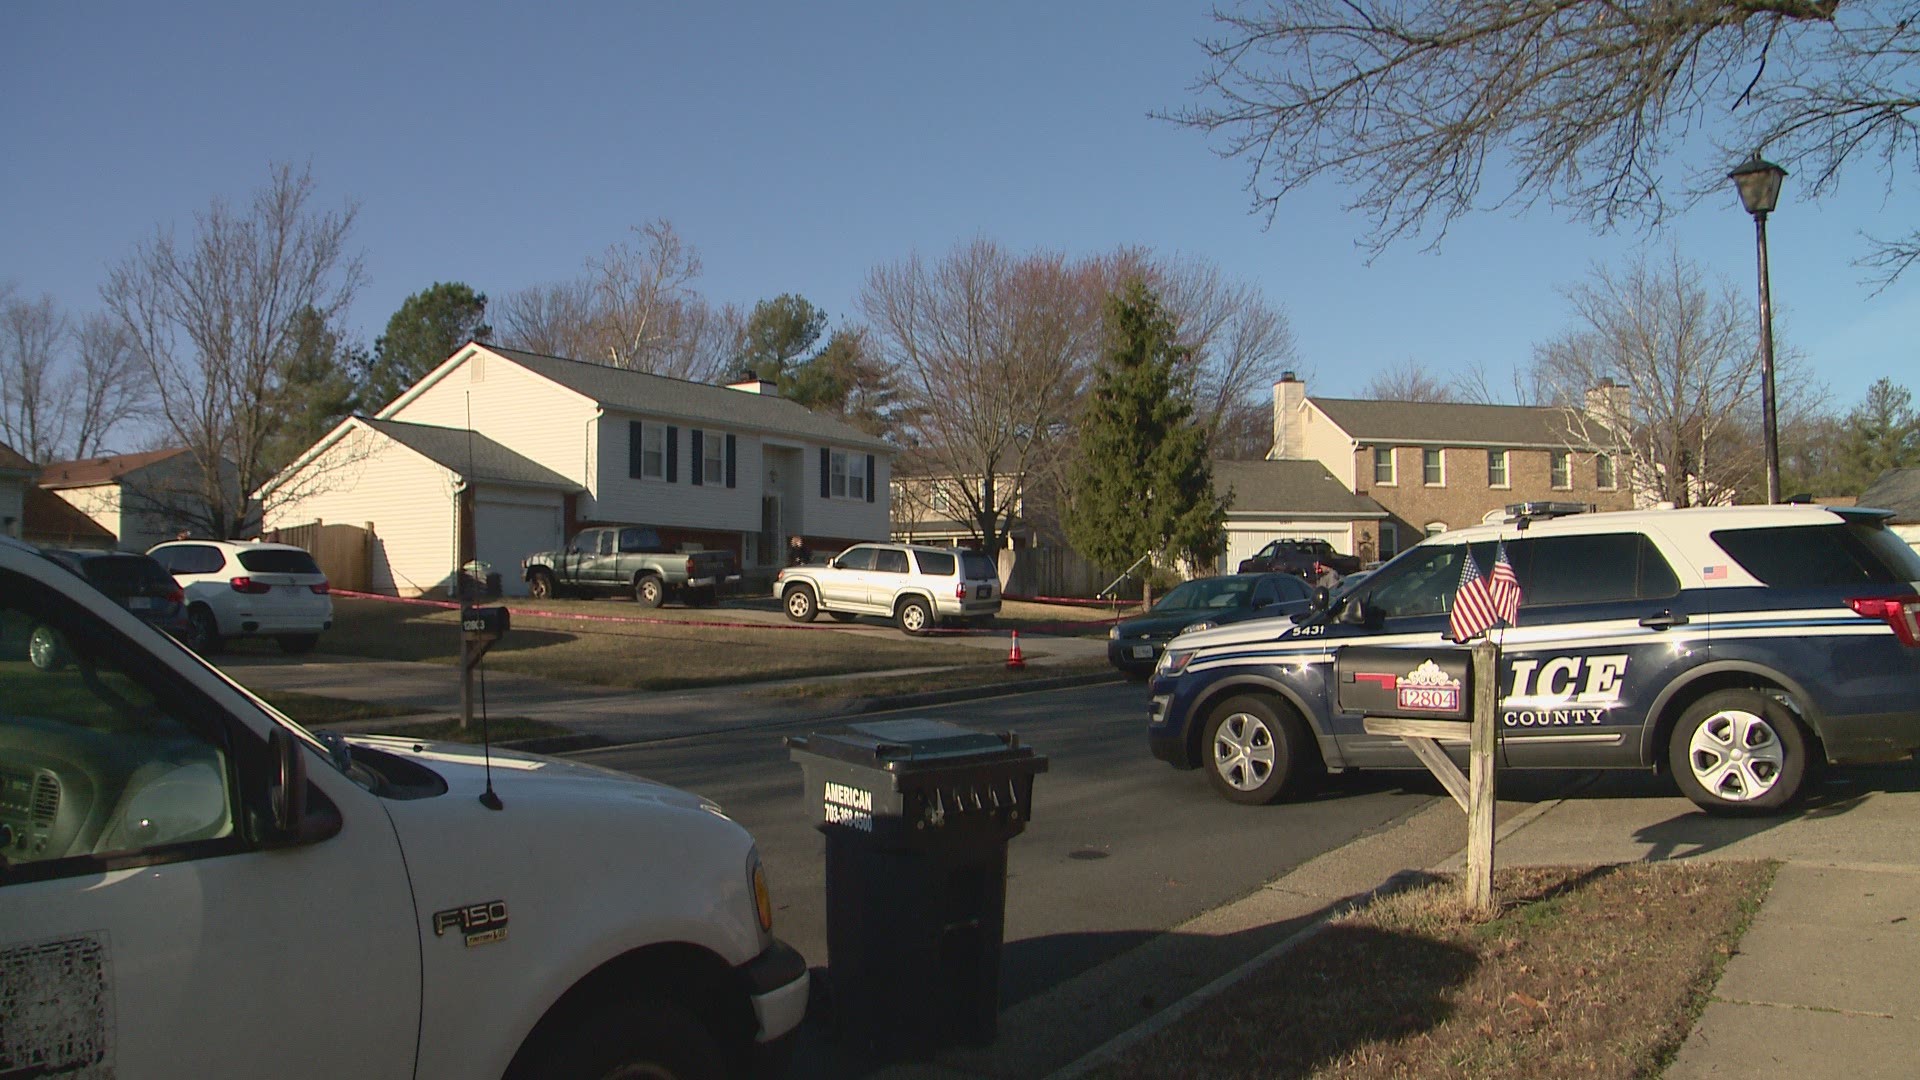 Police are investigating after a domestic shooting Saturday morning.